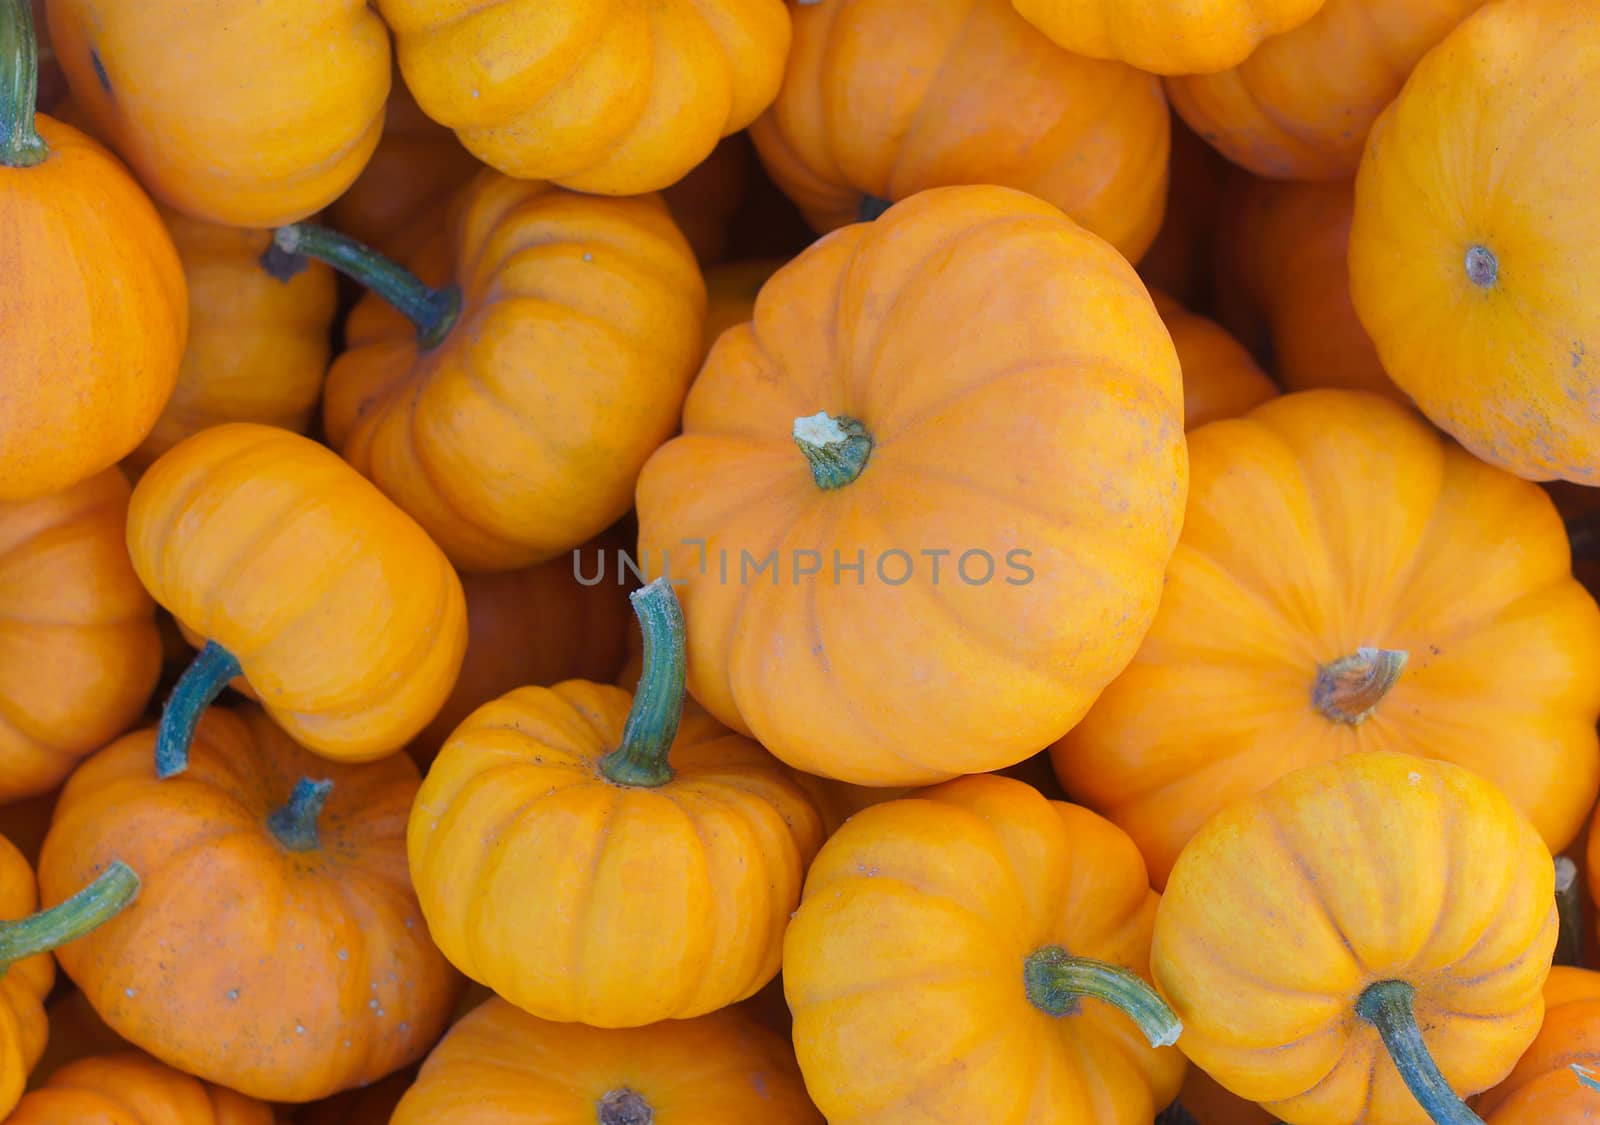 halloween or thanksgiving pumpkins decorative squash at the market by jacquesdurocher